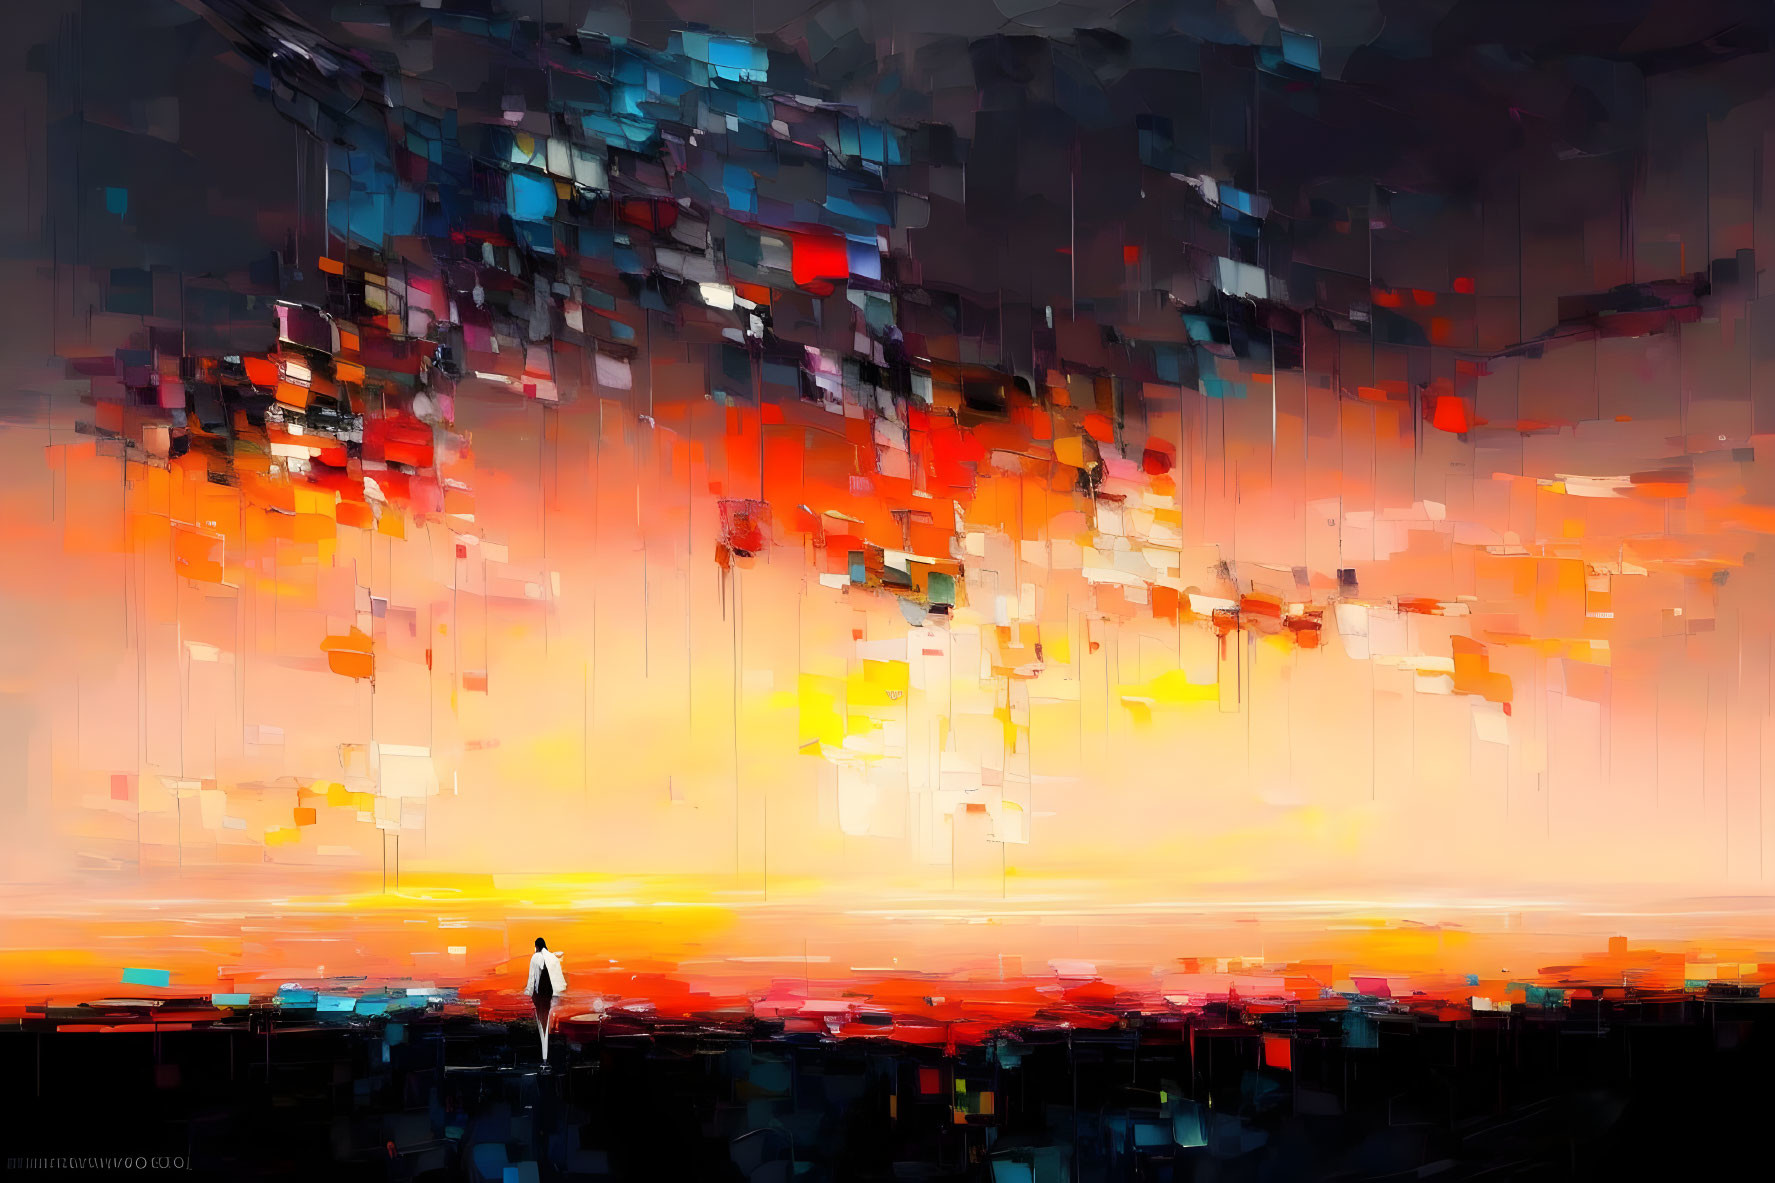 Colorful Abstract Painting with Figure and Cityscape in Sunset Hues